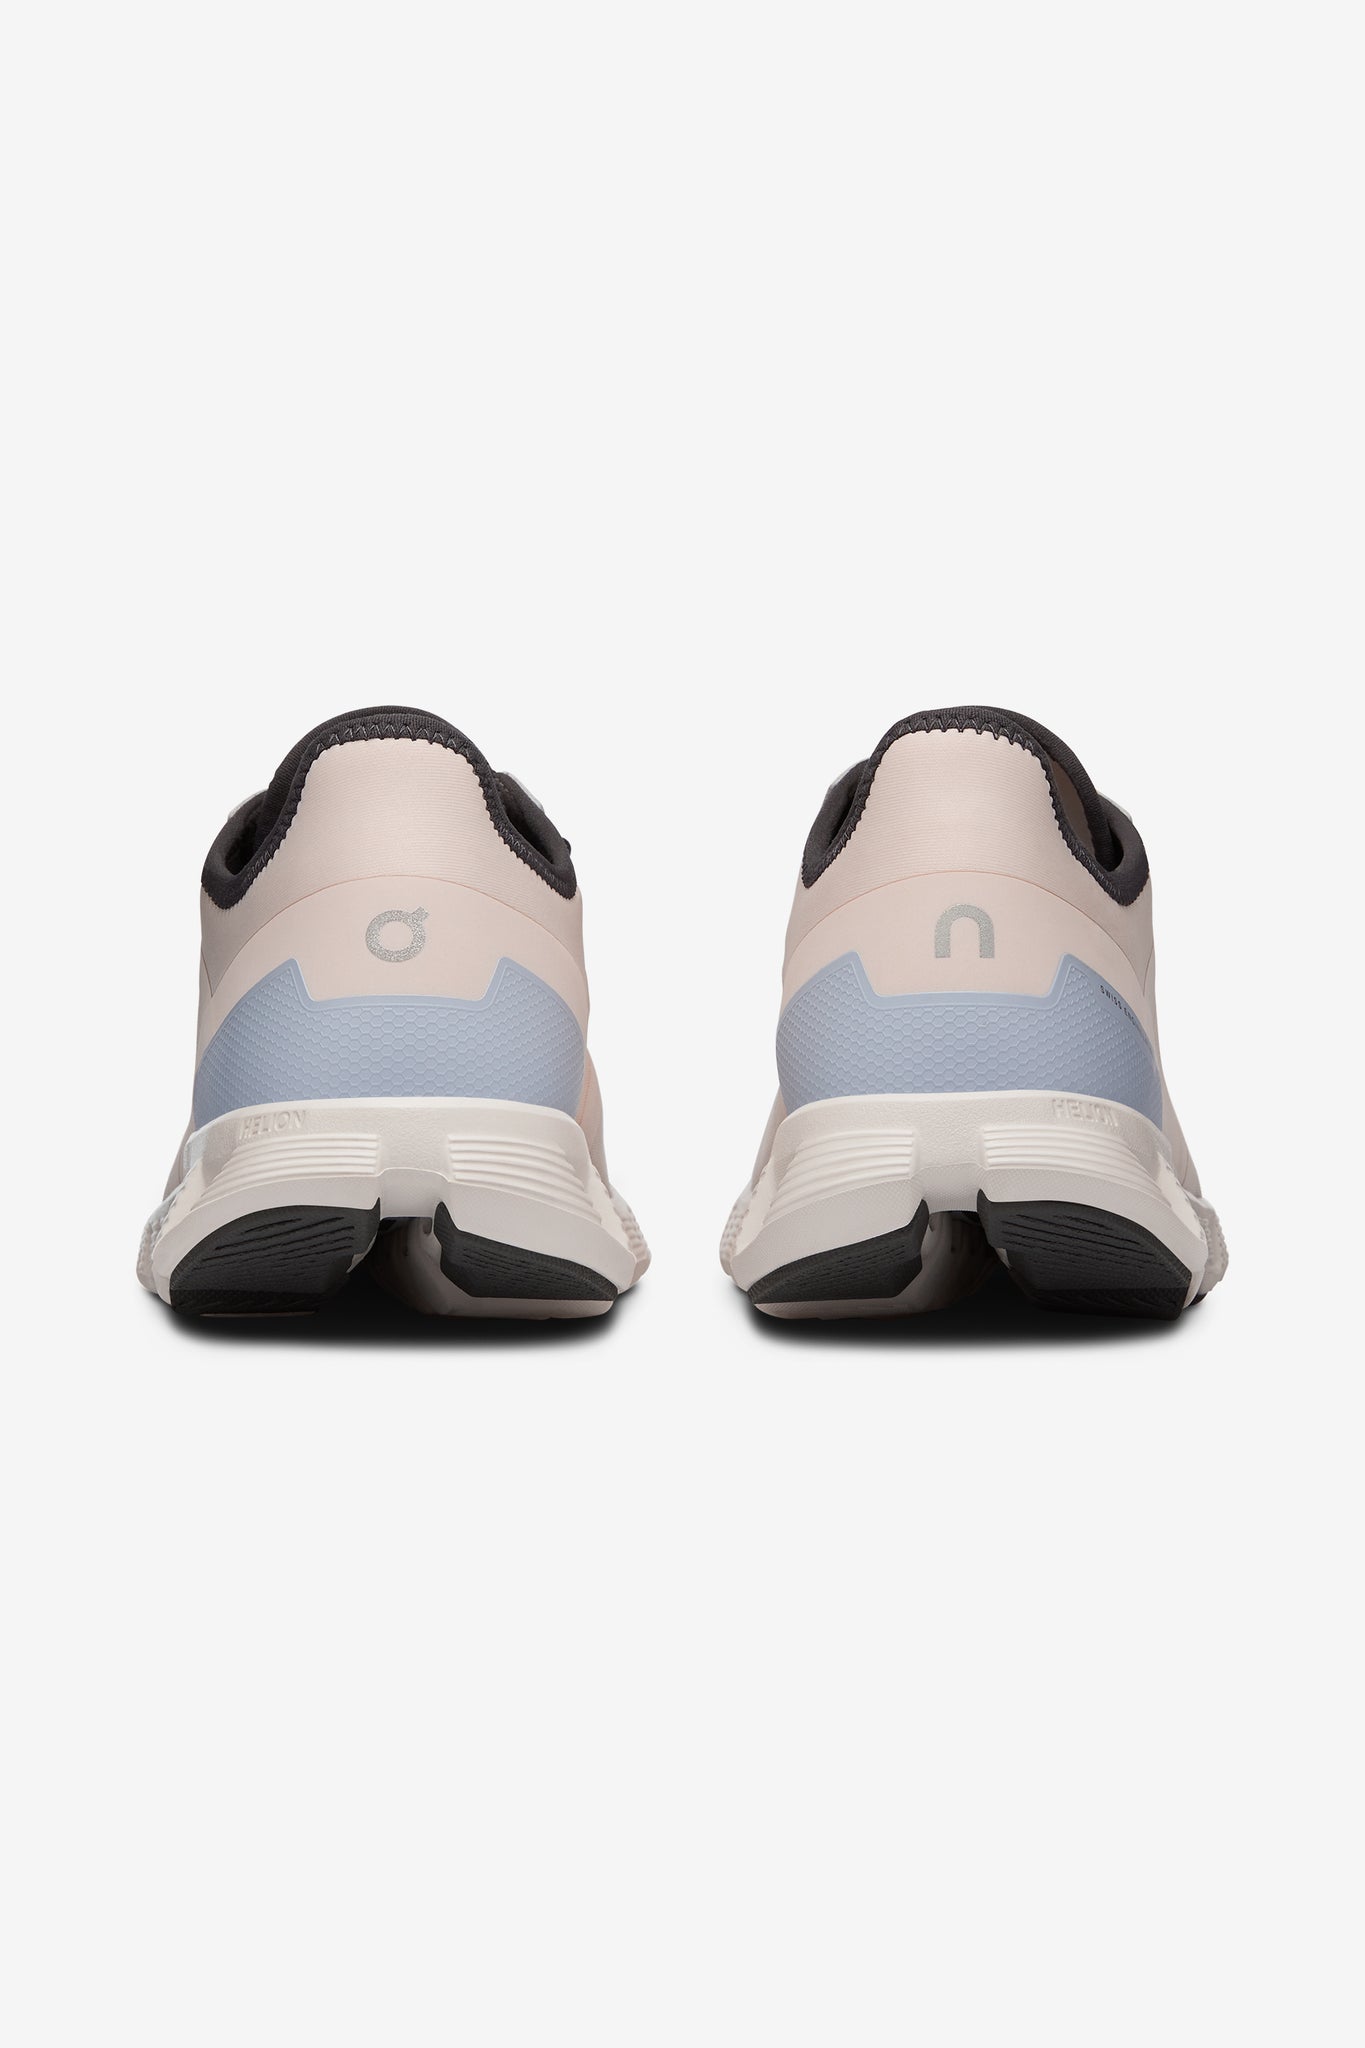 ON | Women's Cloud X 3 AD in Shell/Heather